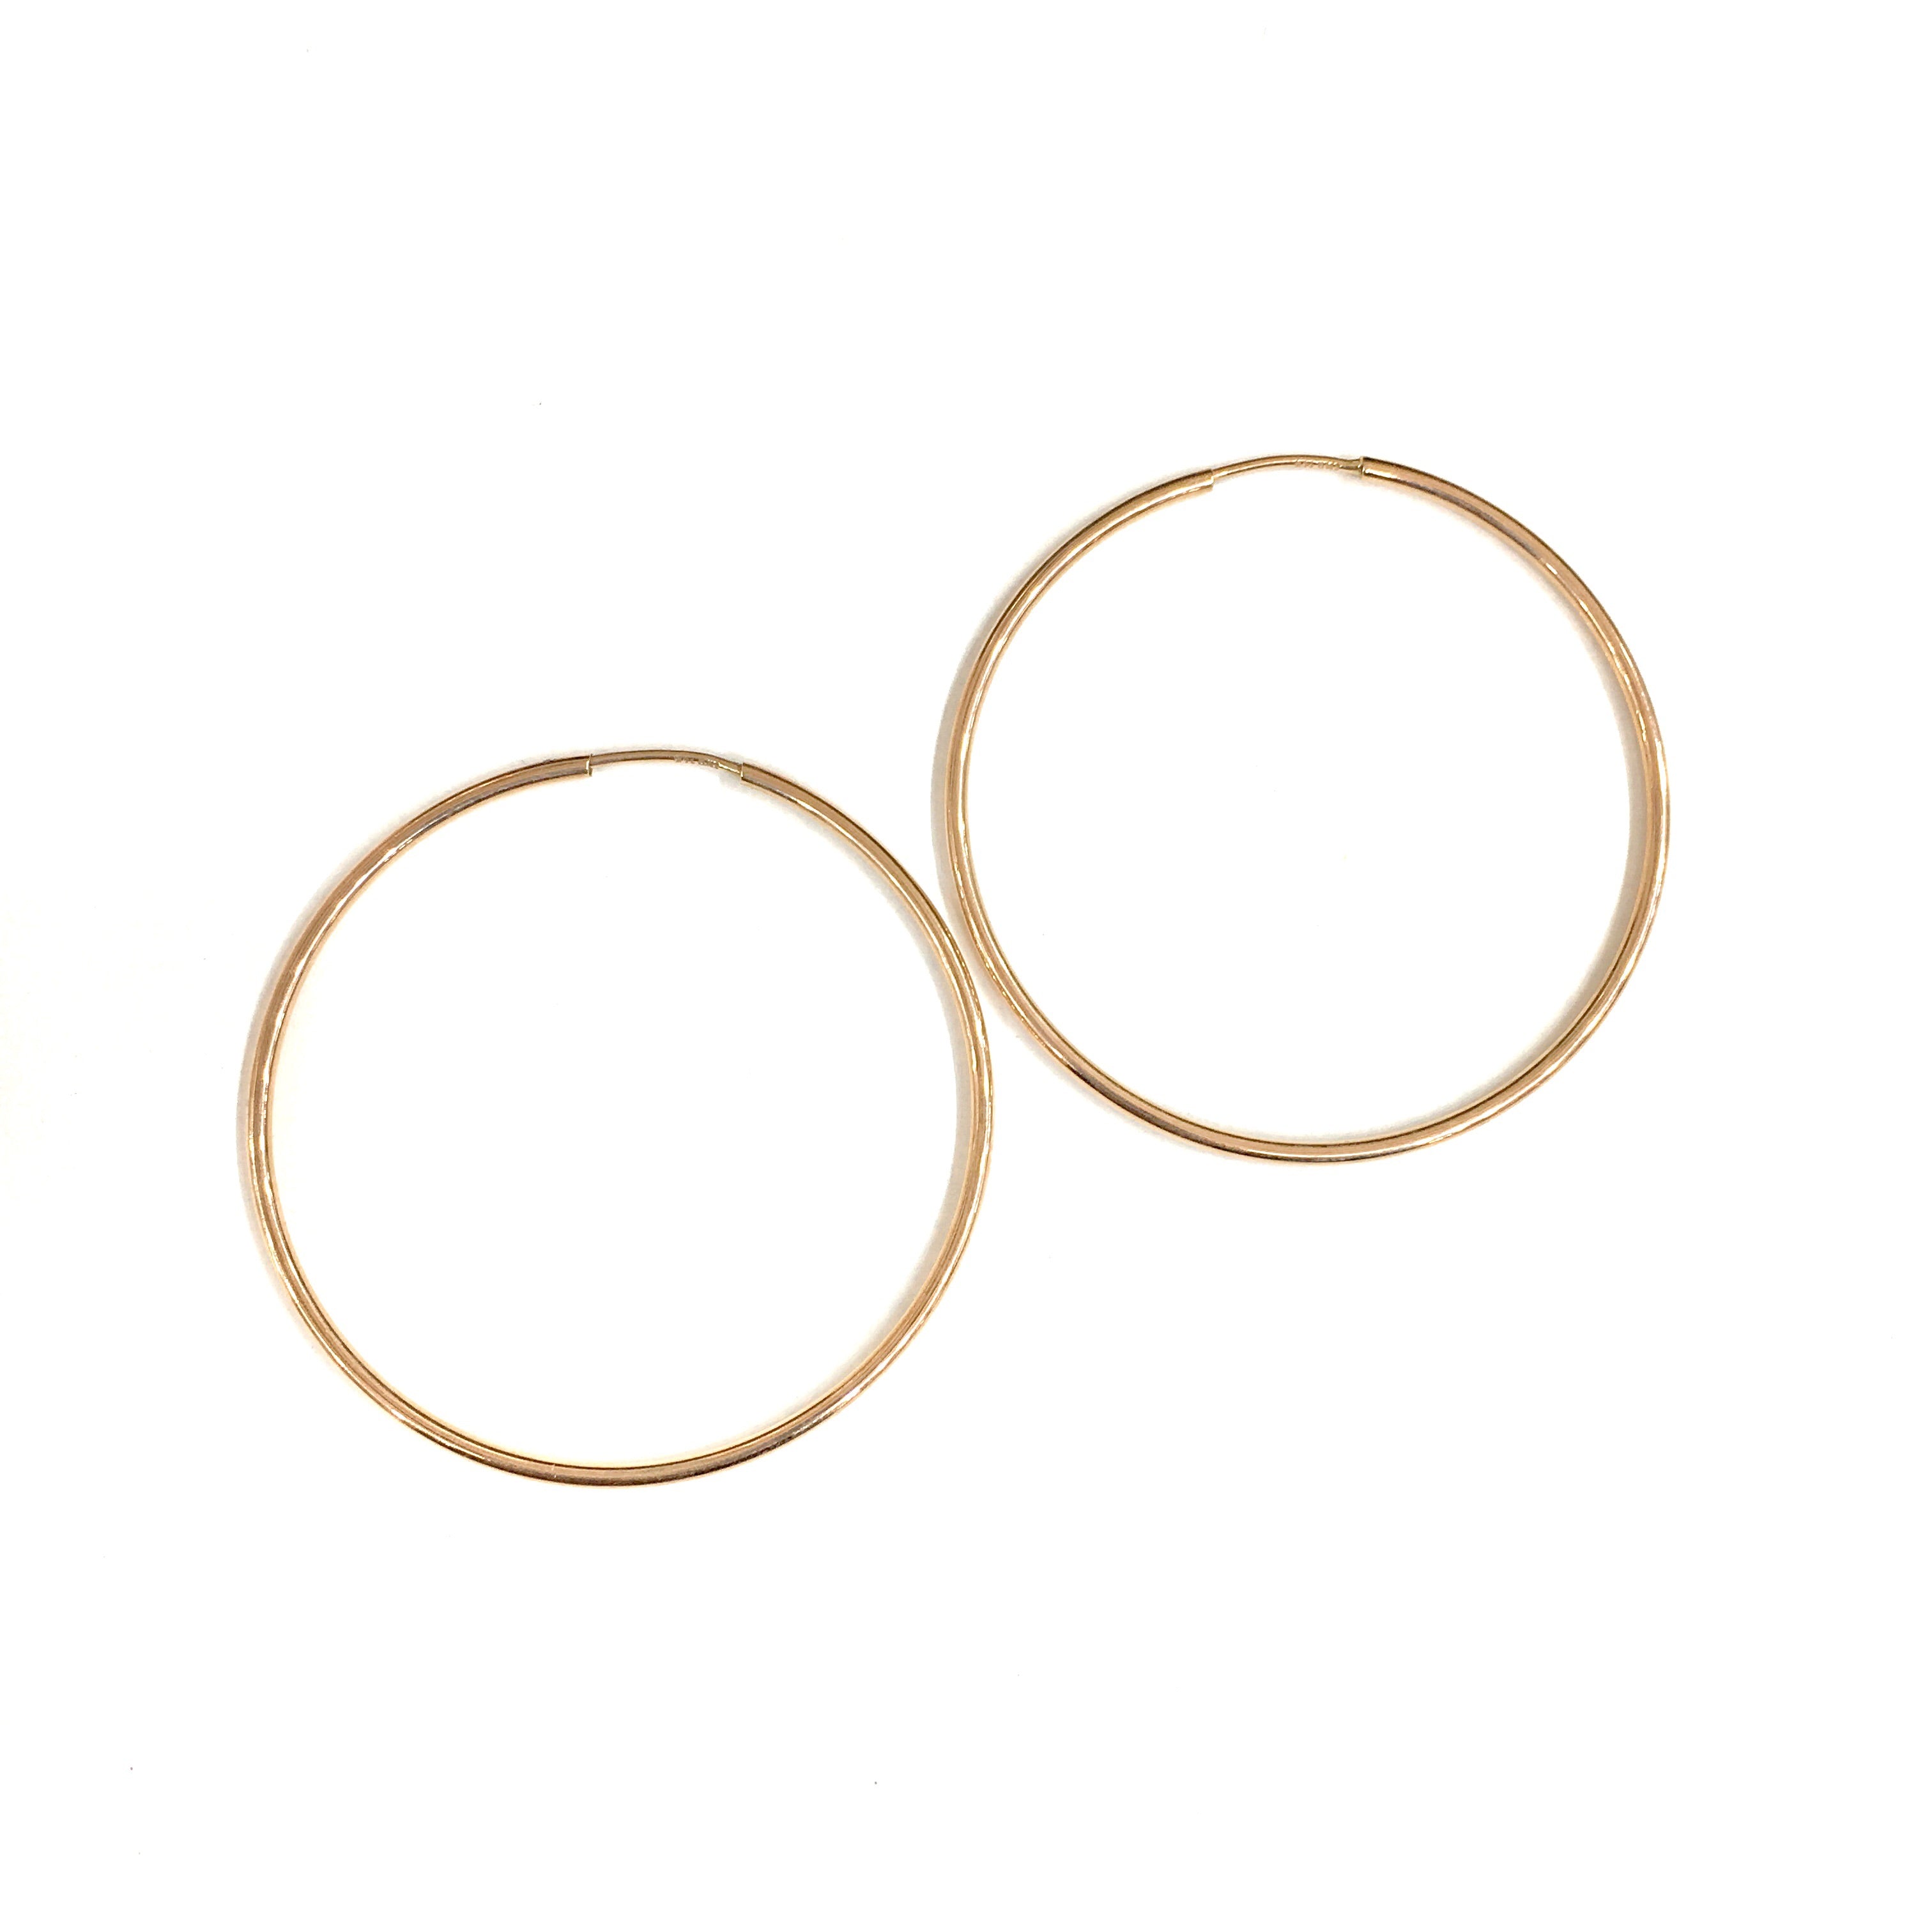 14K YELLOW GOLD 1.7 INCH HOOPS 2MM